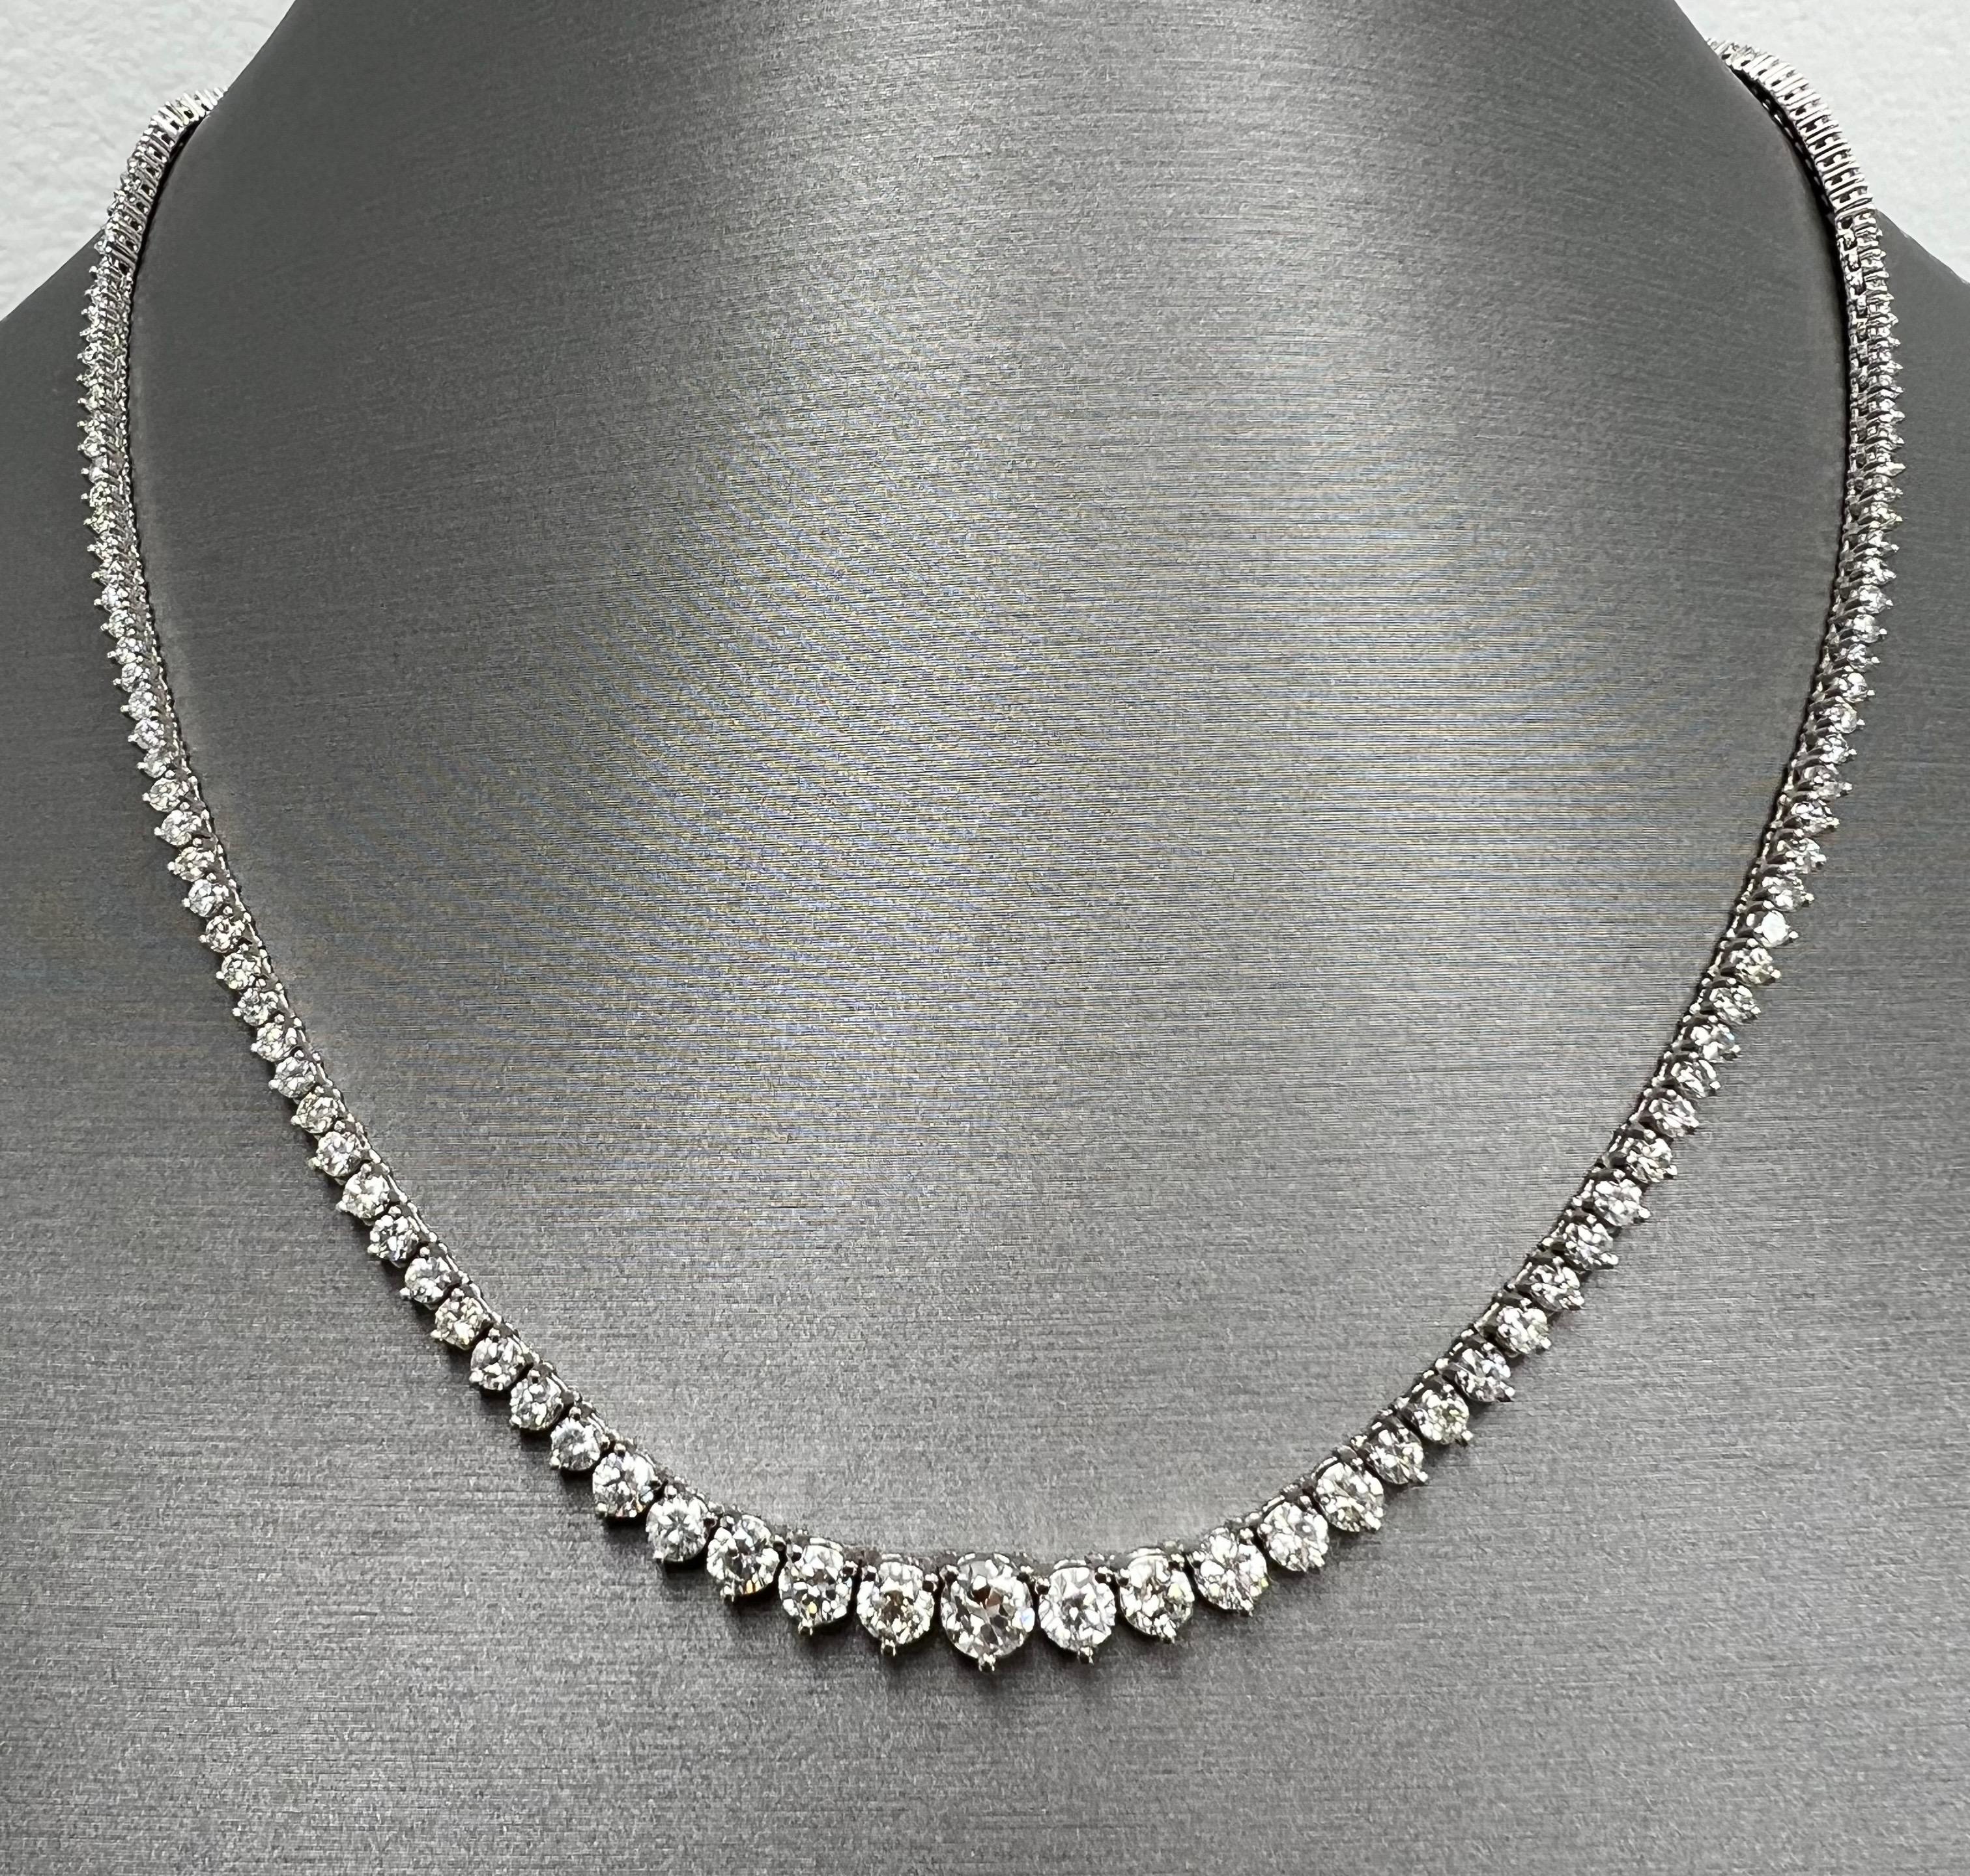 Graduated Tennis Necklace in 14k White Gold with 10.02ct of Natural Diamonds
Natural Full Brilliant Cut Diamonds.
14k White Gold
3 Prongs
Necklace's Length: 17' inches
Number of Diamonds: 177 
Total Diamonds Weight: 10.02 Carats
Diamond's Color: